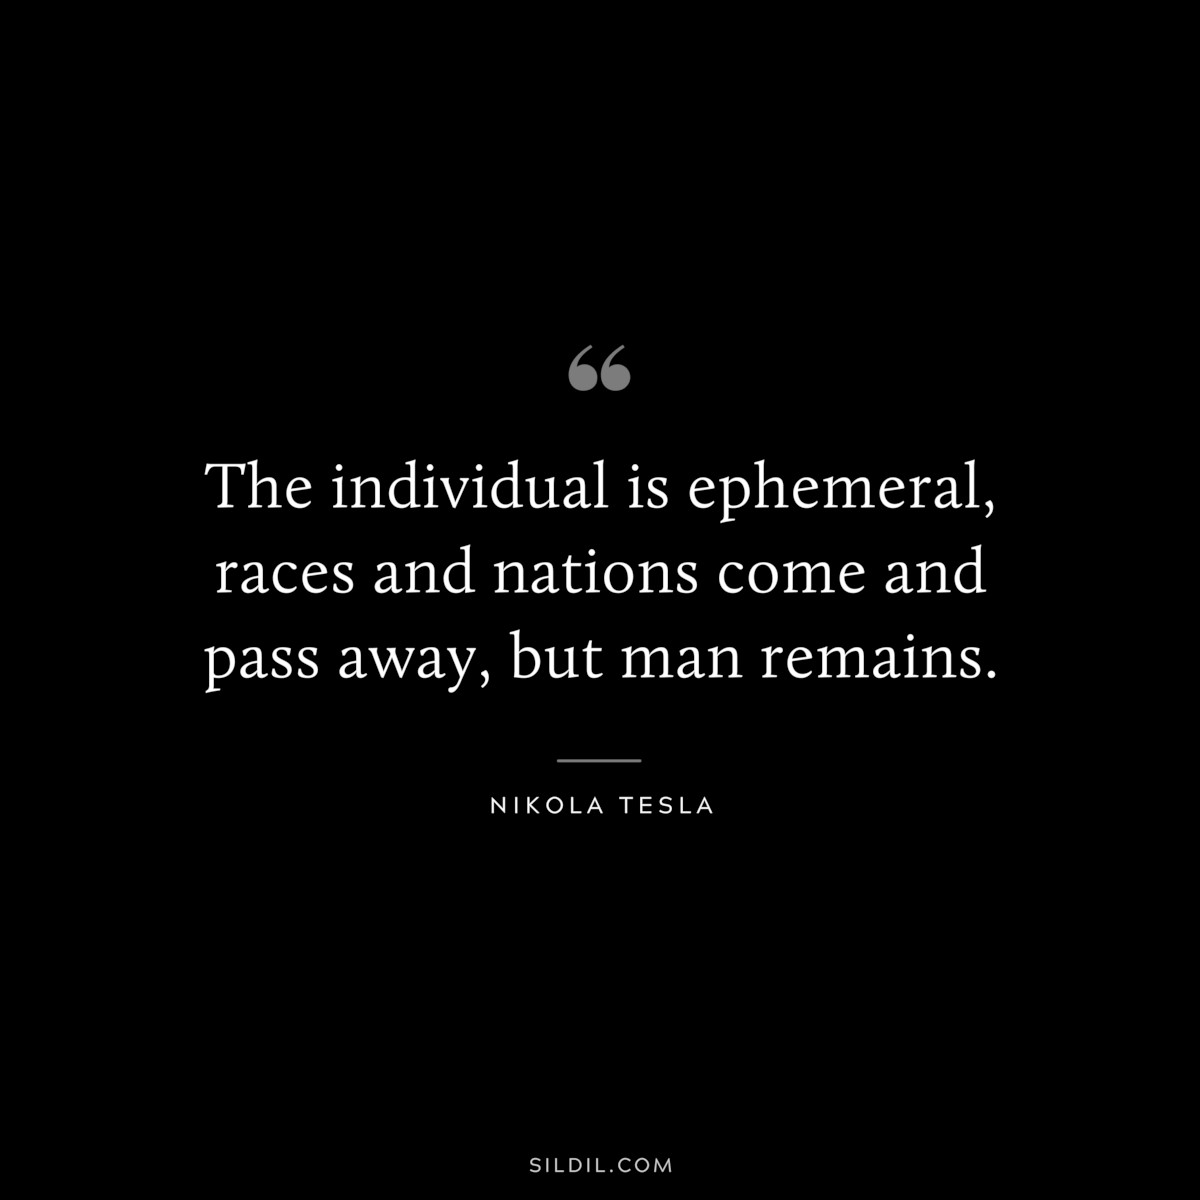 The individual is ephemeral, races and nations come and pass away, but man remains. ― Nikola Tesla